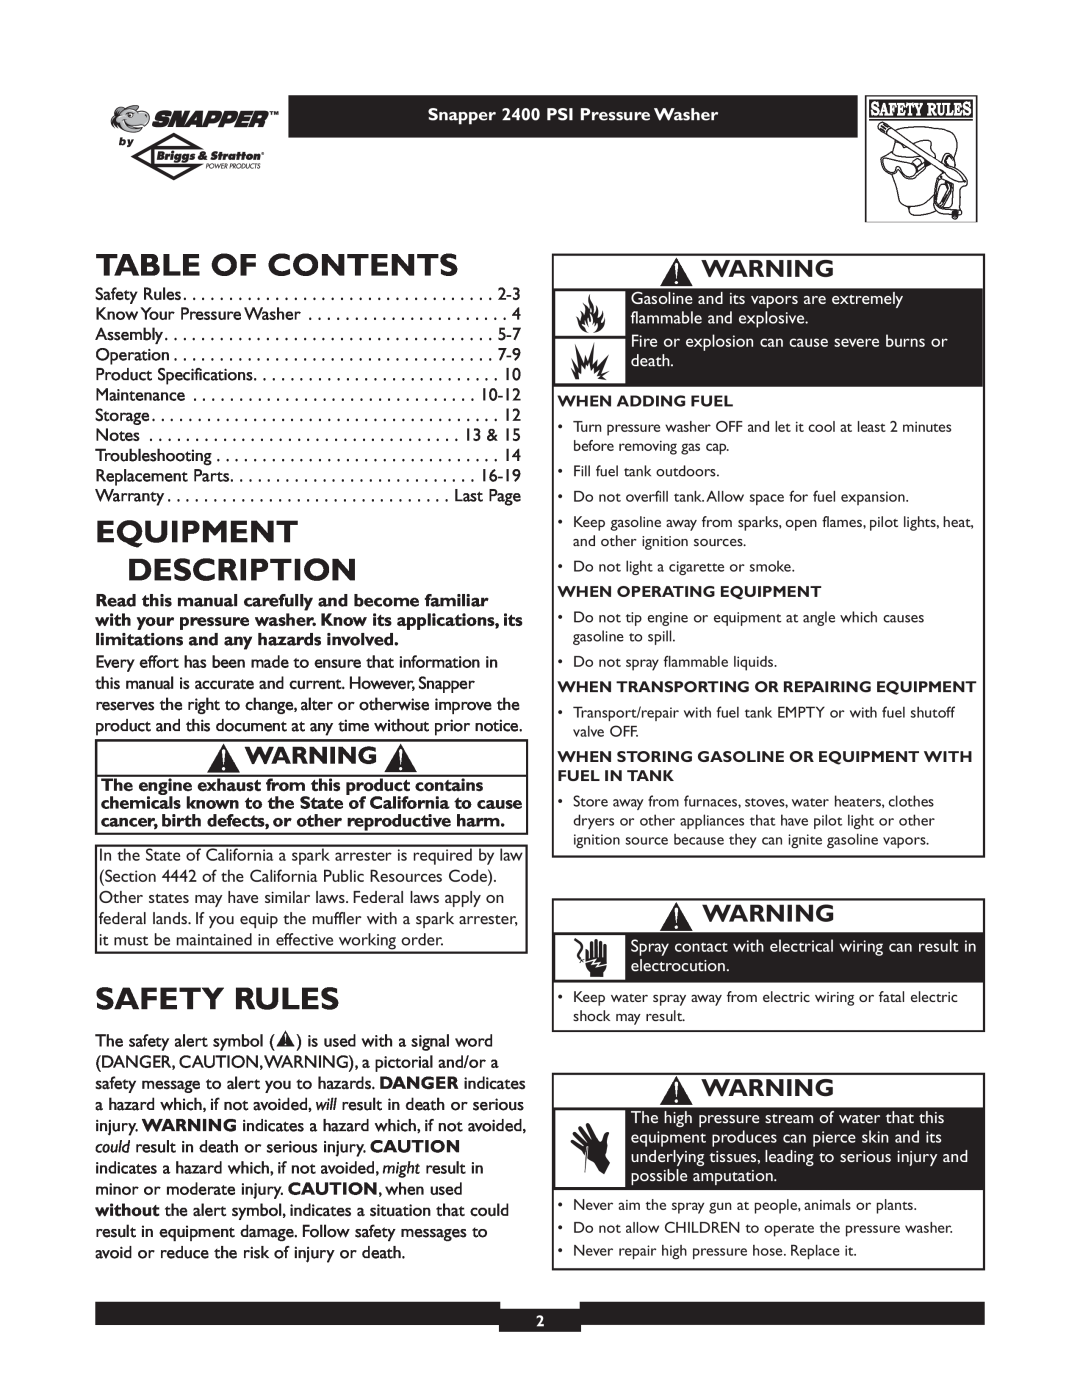 Snapper 1660-0 Table Of Contents, Equipment Description, Safety Rules, Snapper 2400 PSI Pressure Washer, When Adding Fuel 